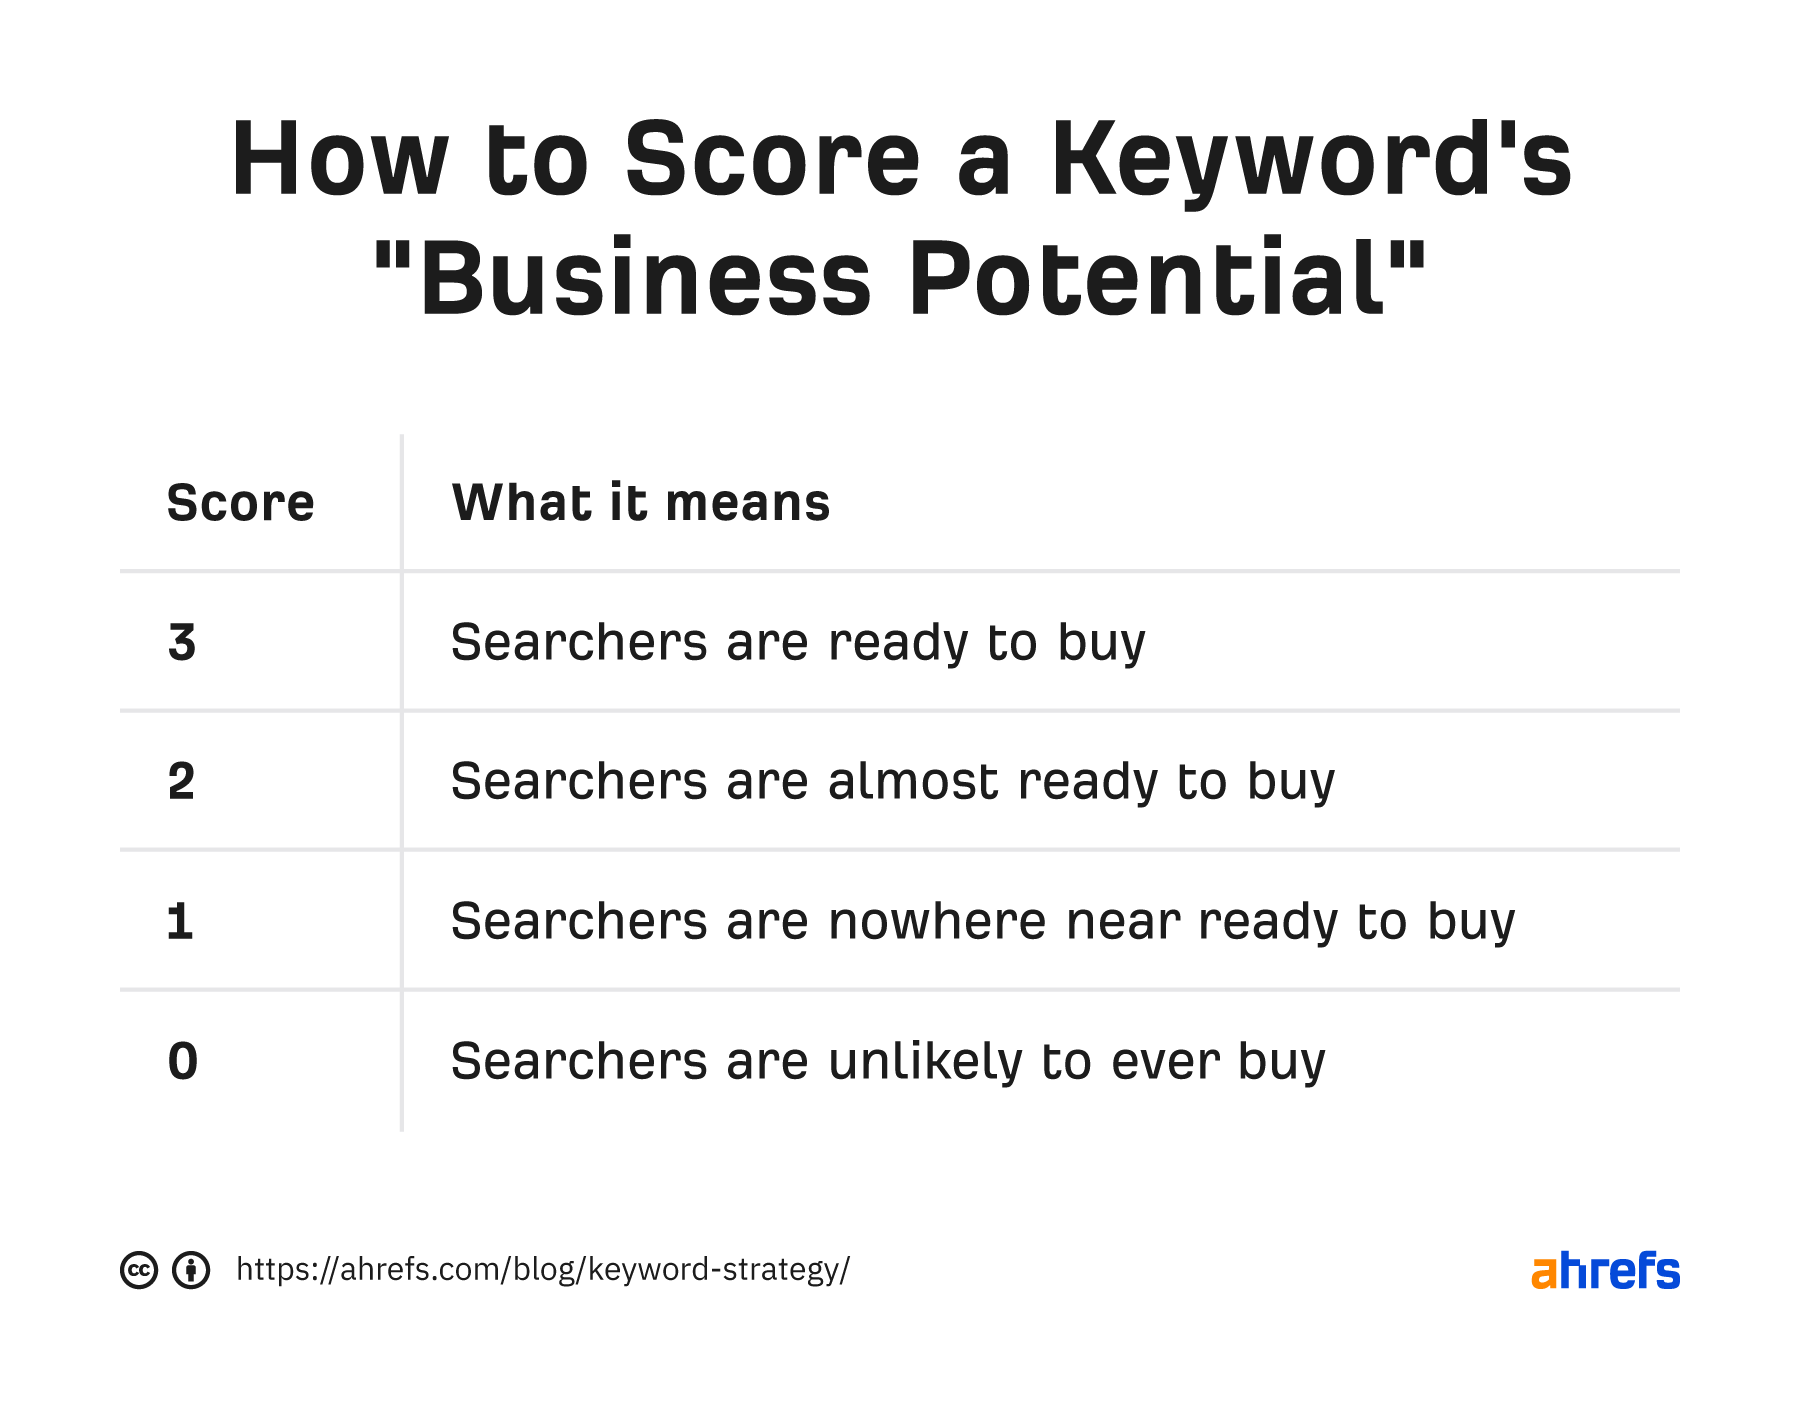 How to score a keyword's business potential